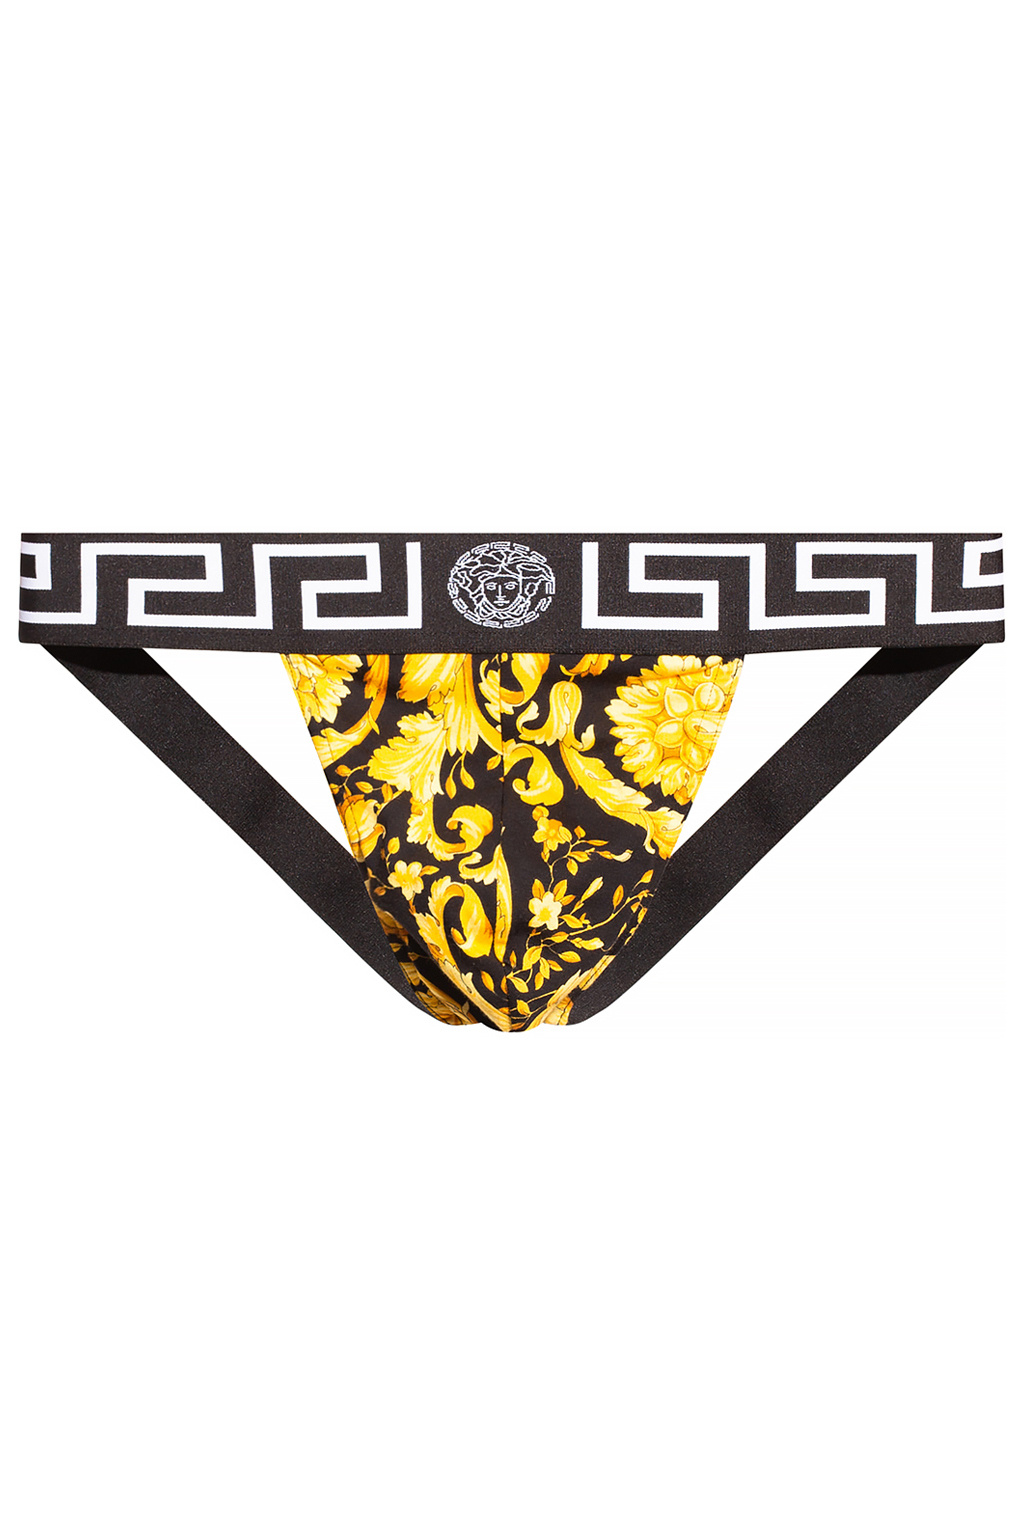 Versace Thong with logo, Women's Clothing